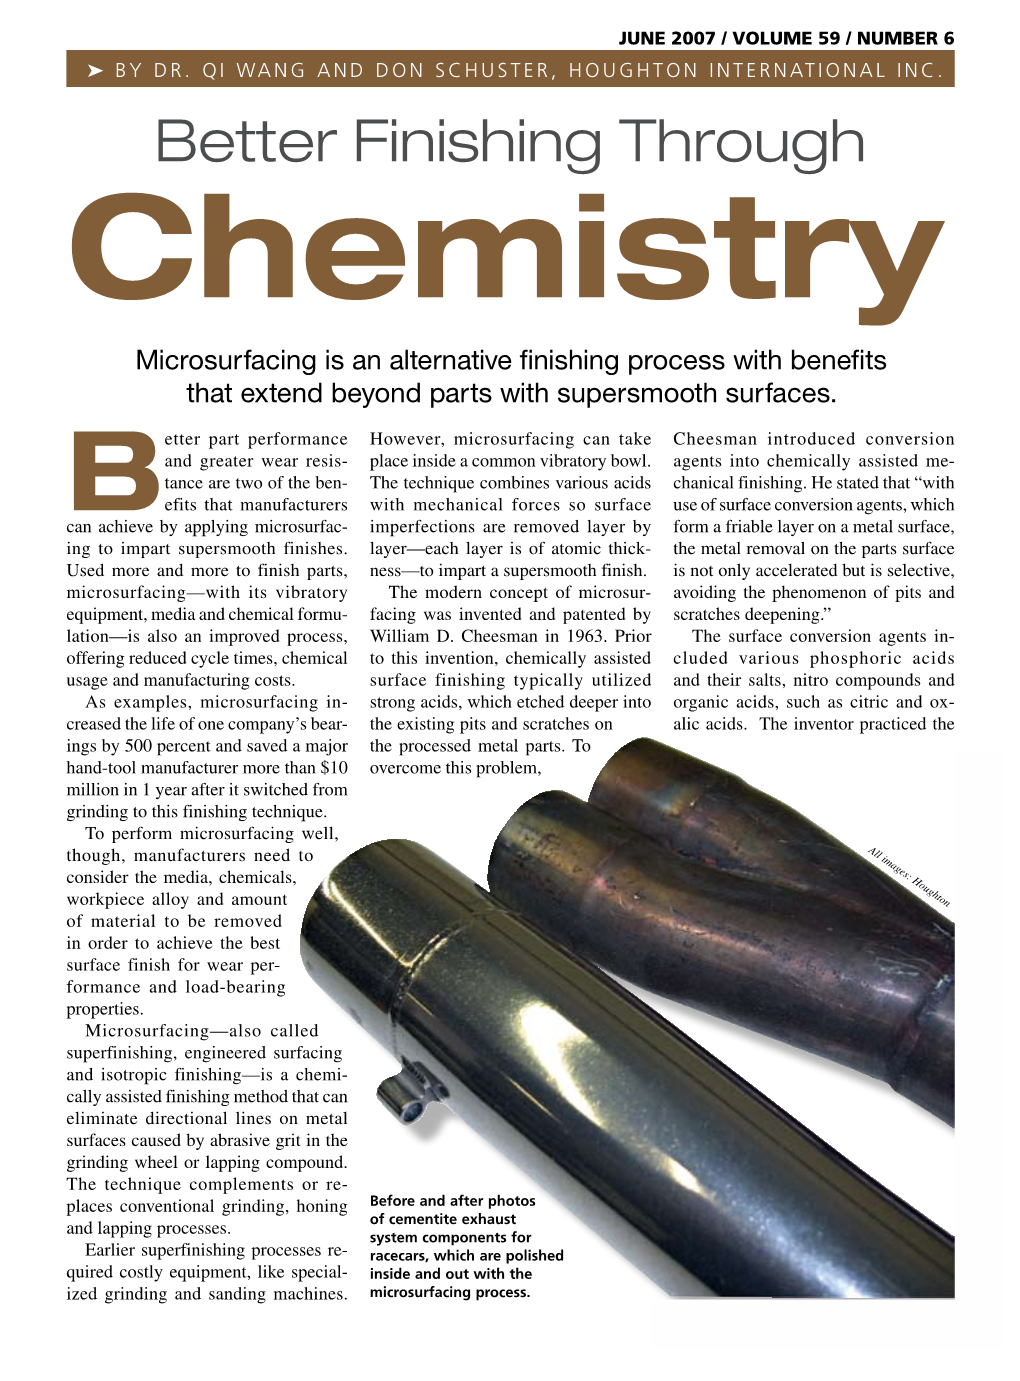 Better Finishing Through Chemistry Microsurfacing Is an Alternative Finishing Process with Benefits That Extend Beyond Parts with Supersmooth Surfaces